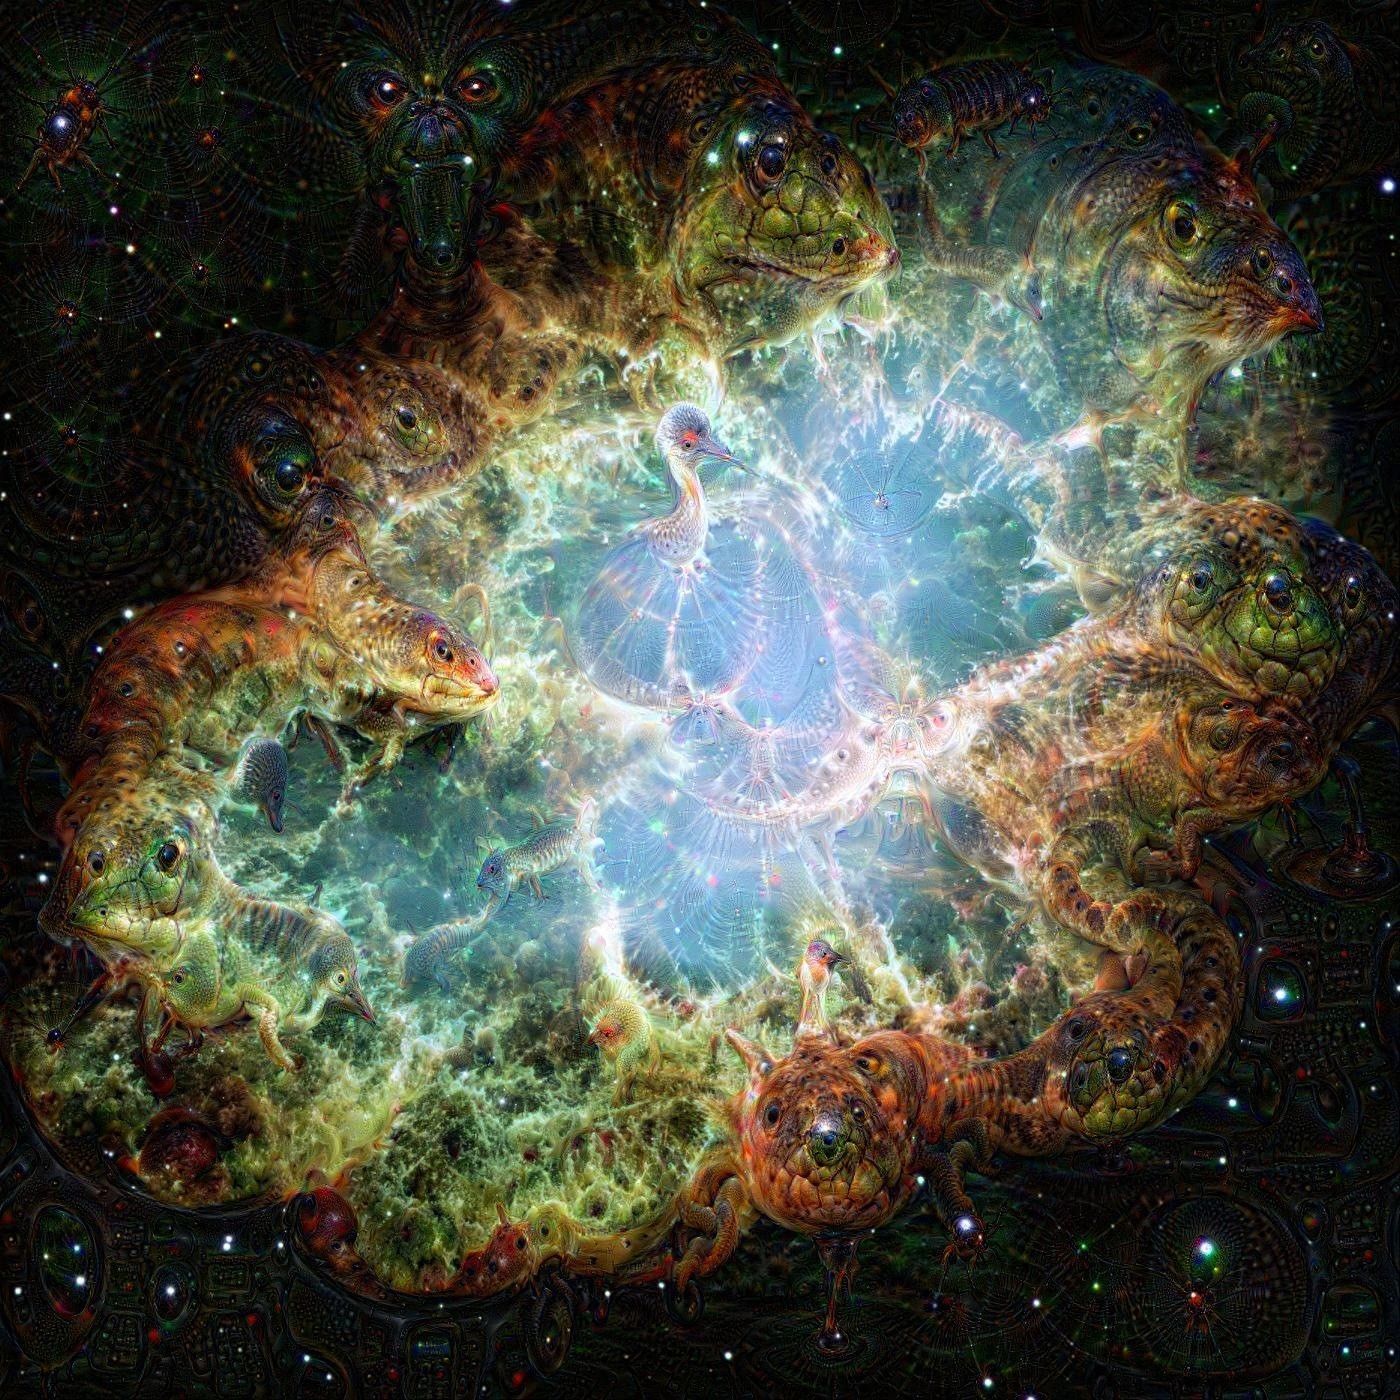 The birth of life in the crab nebula